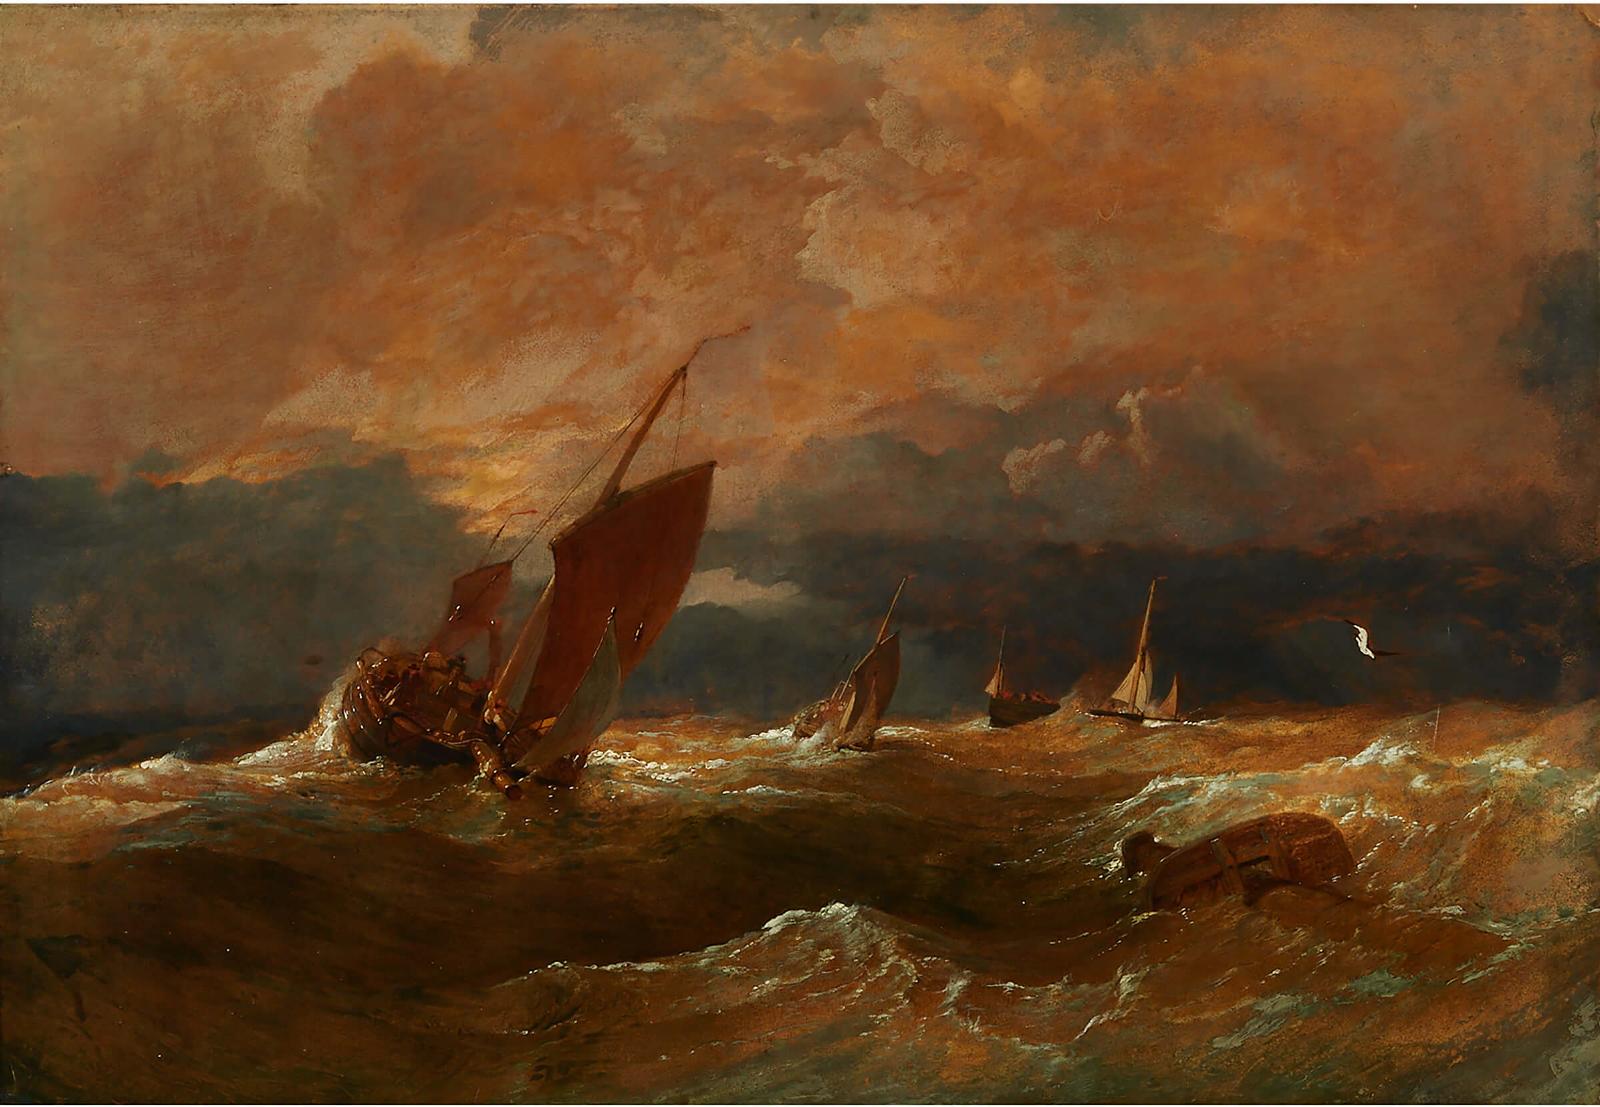 Anthony Van Dyck Copley Fielding (1787-1855) - Shipping In A Storm At Sunset